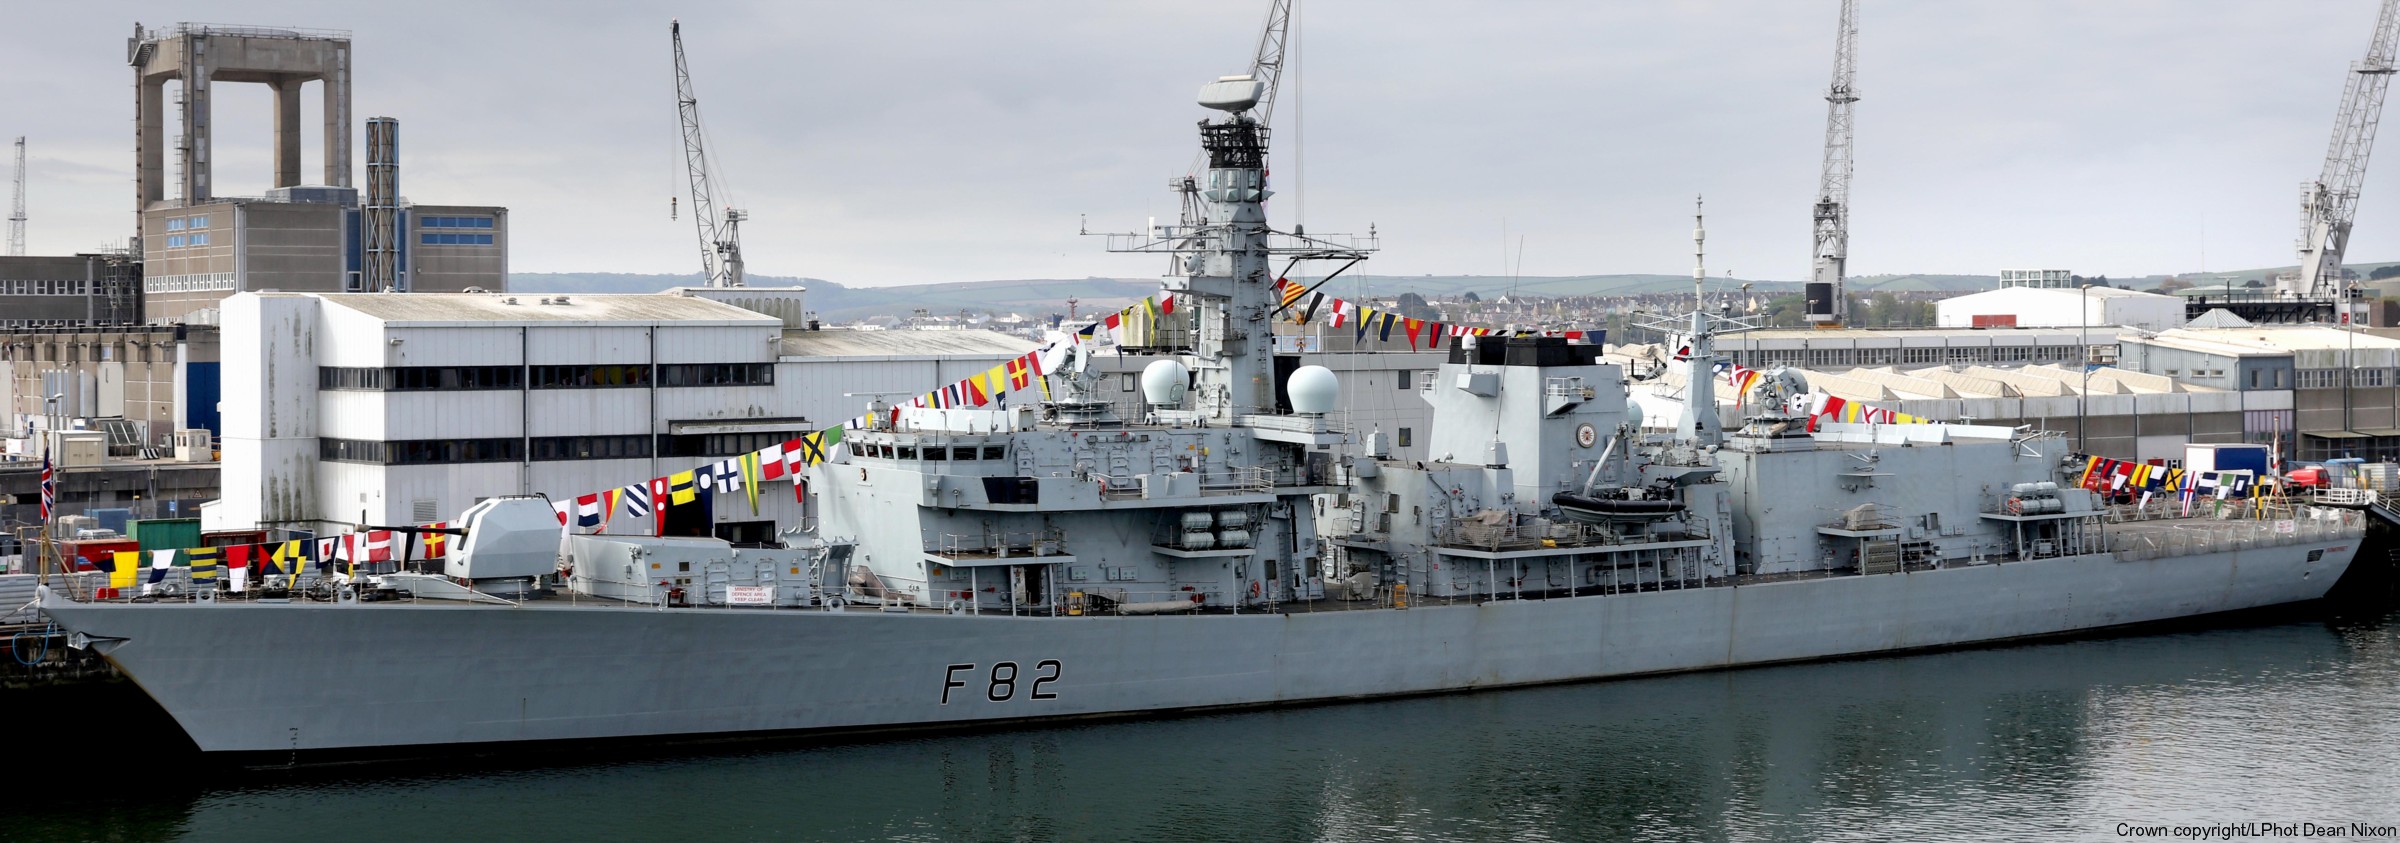 f-82 hms somerset type 23 duke class guided missile frigate ffg royal navy 35